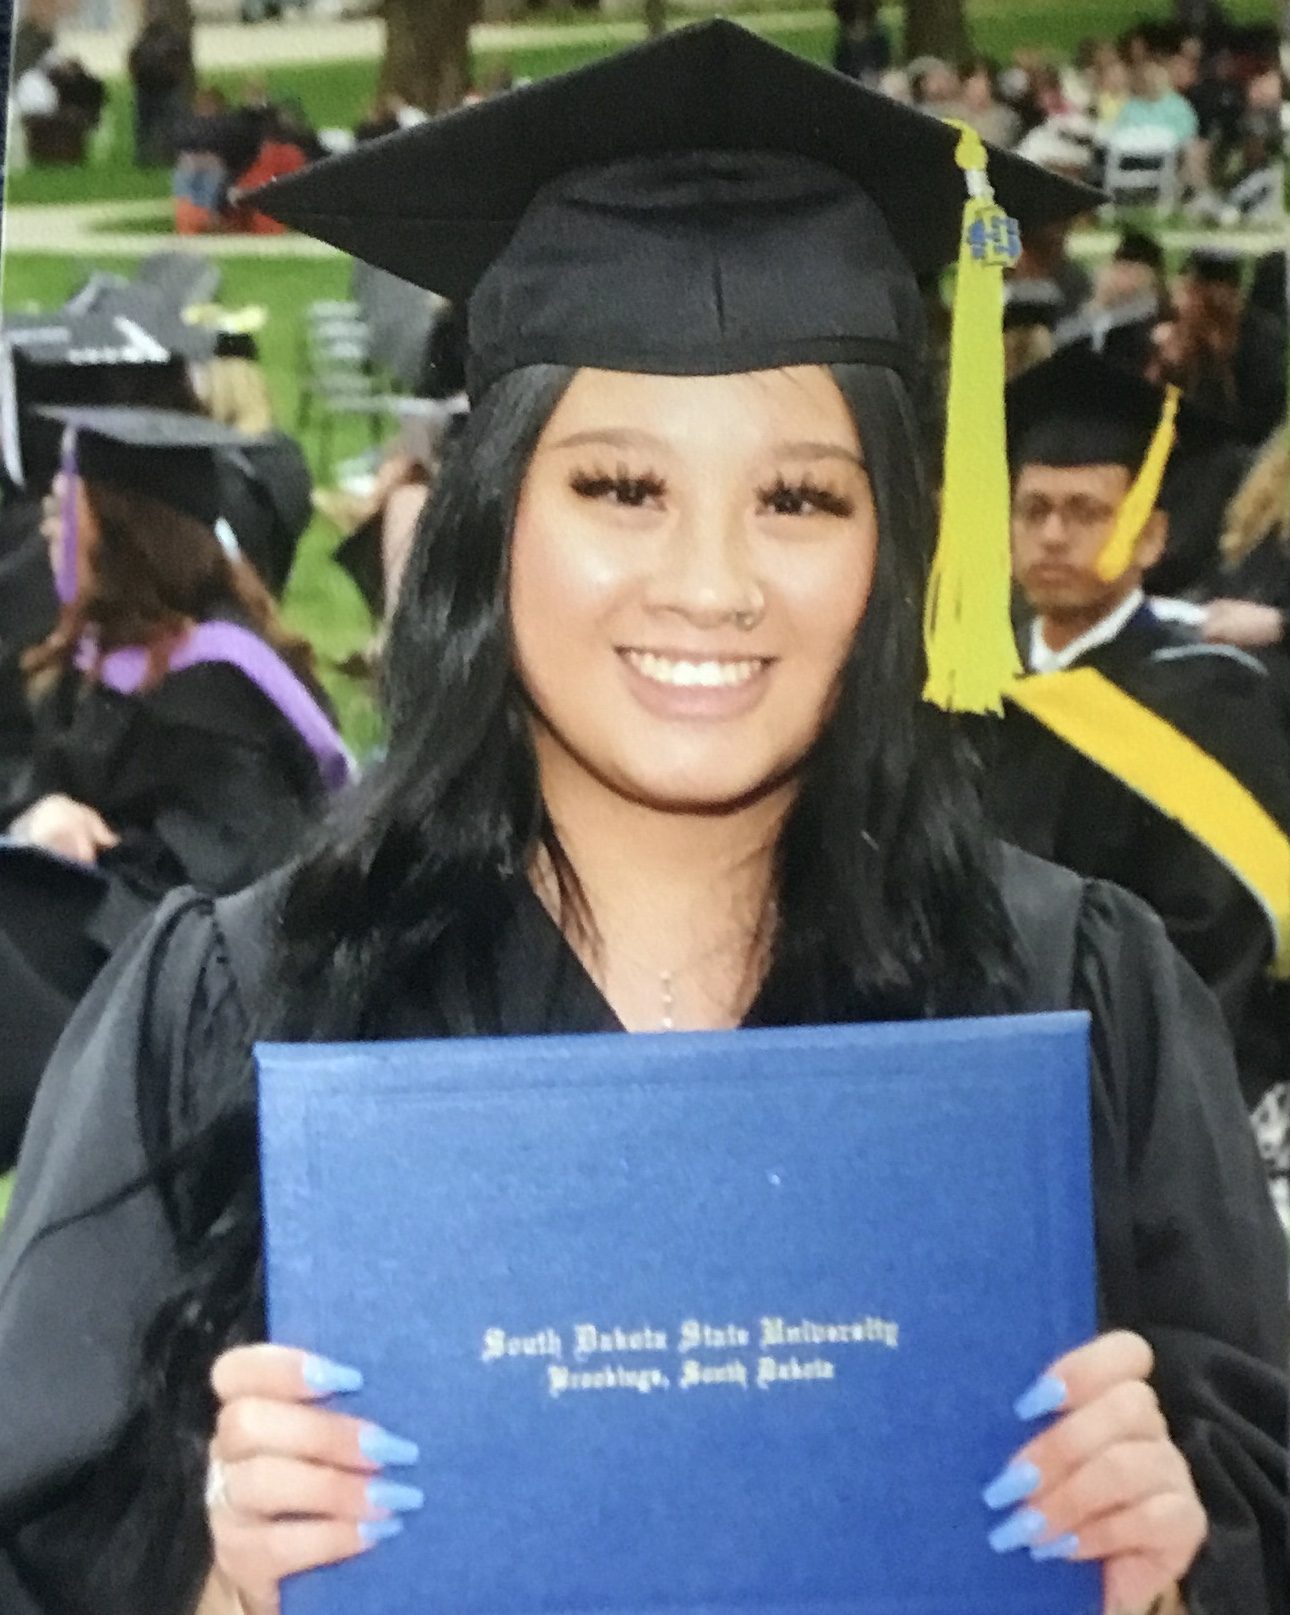 smiling girl wearing black graduation cap and gown and holding blue diploma